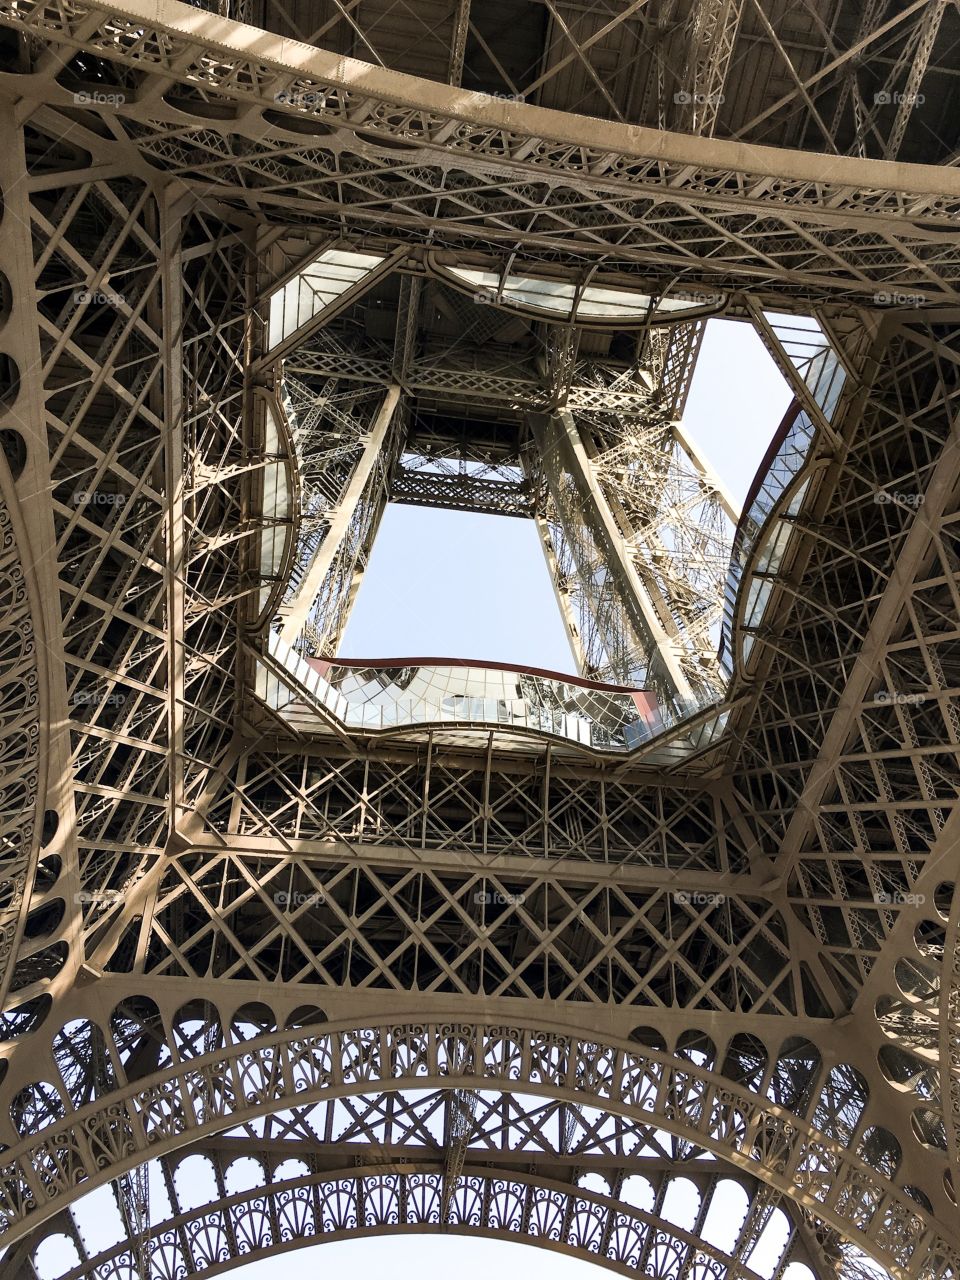 The Eiffel Tower from beneath. Some sky can be seen, but mainly the building itself.